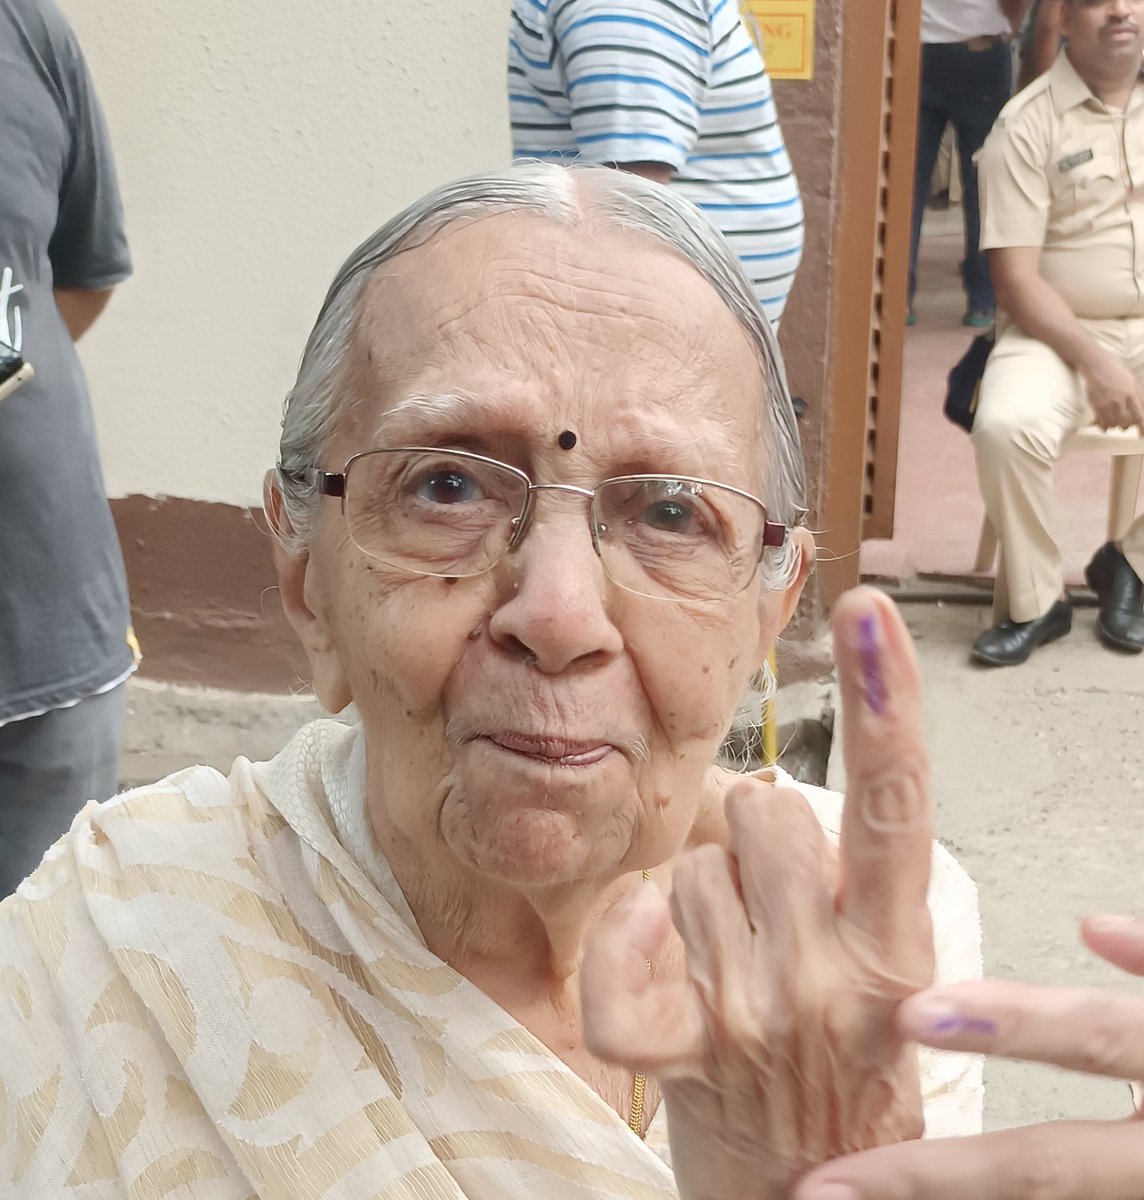 Refused the Vote At Home service, wanted to come to the booth to vote. Was ready early in the morning. My grandmother, a retired schoolteacher. She's 99. 

What's your excuse?